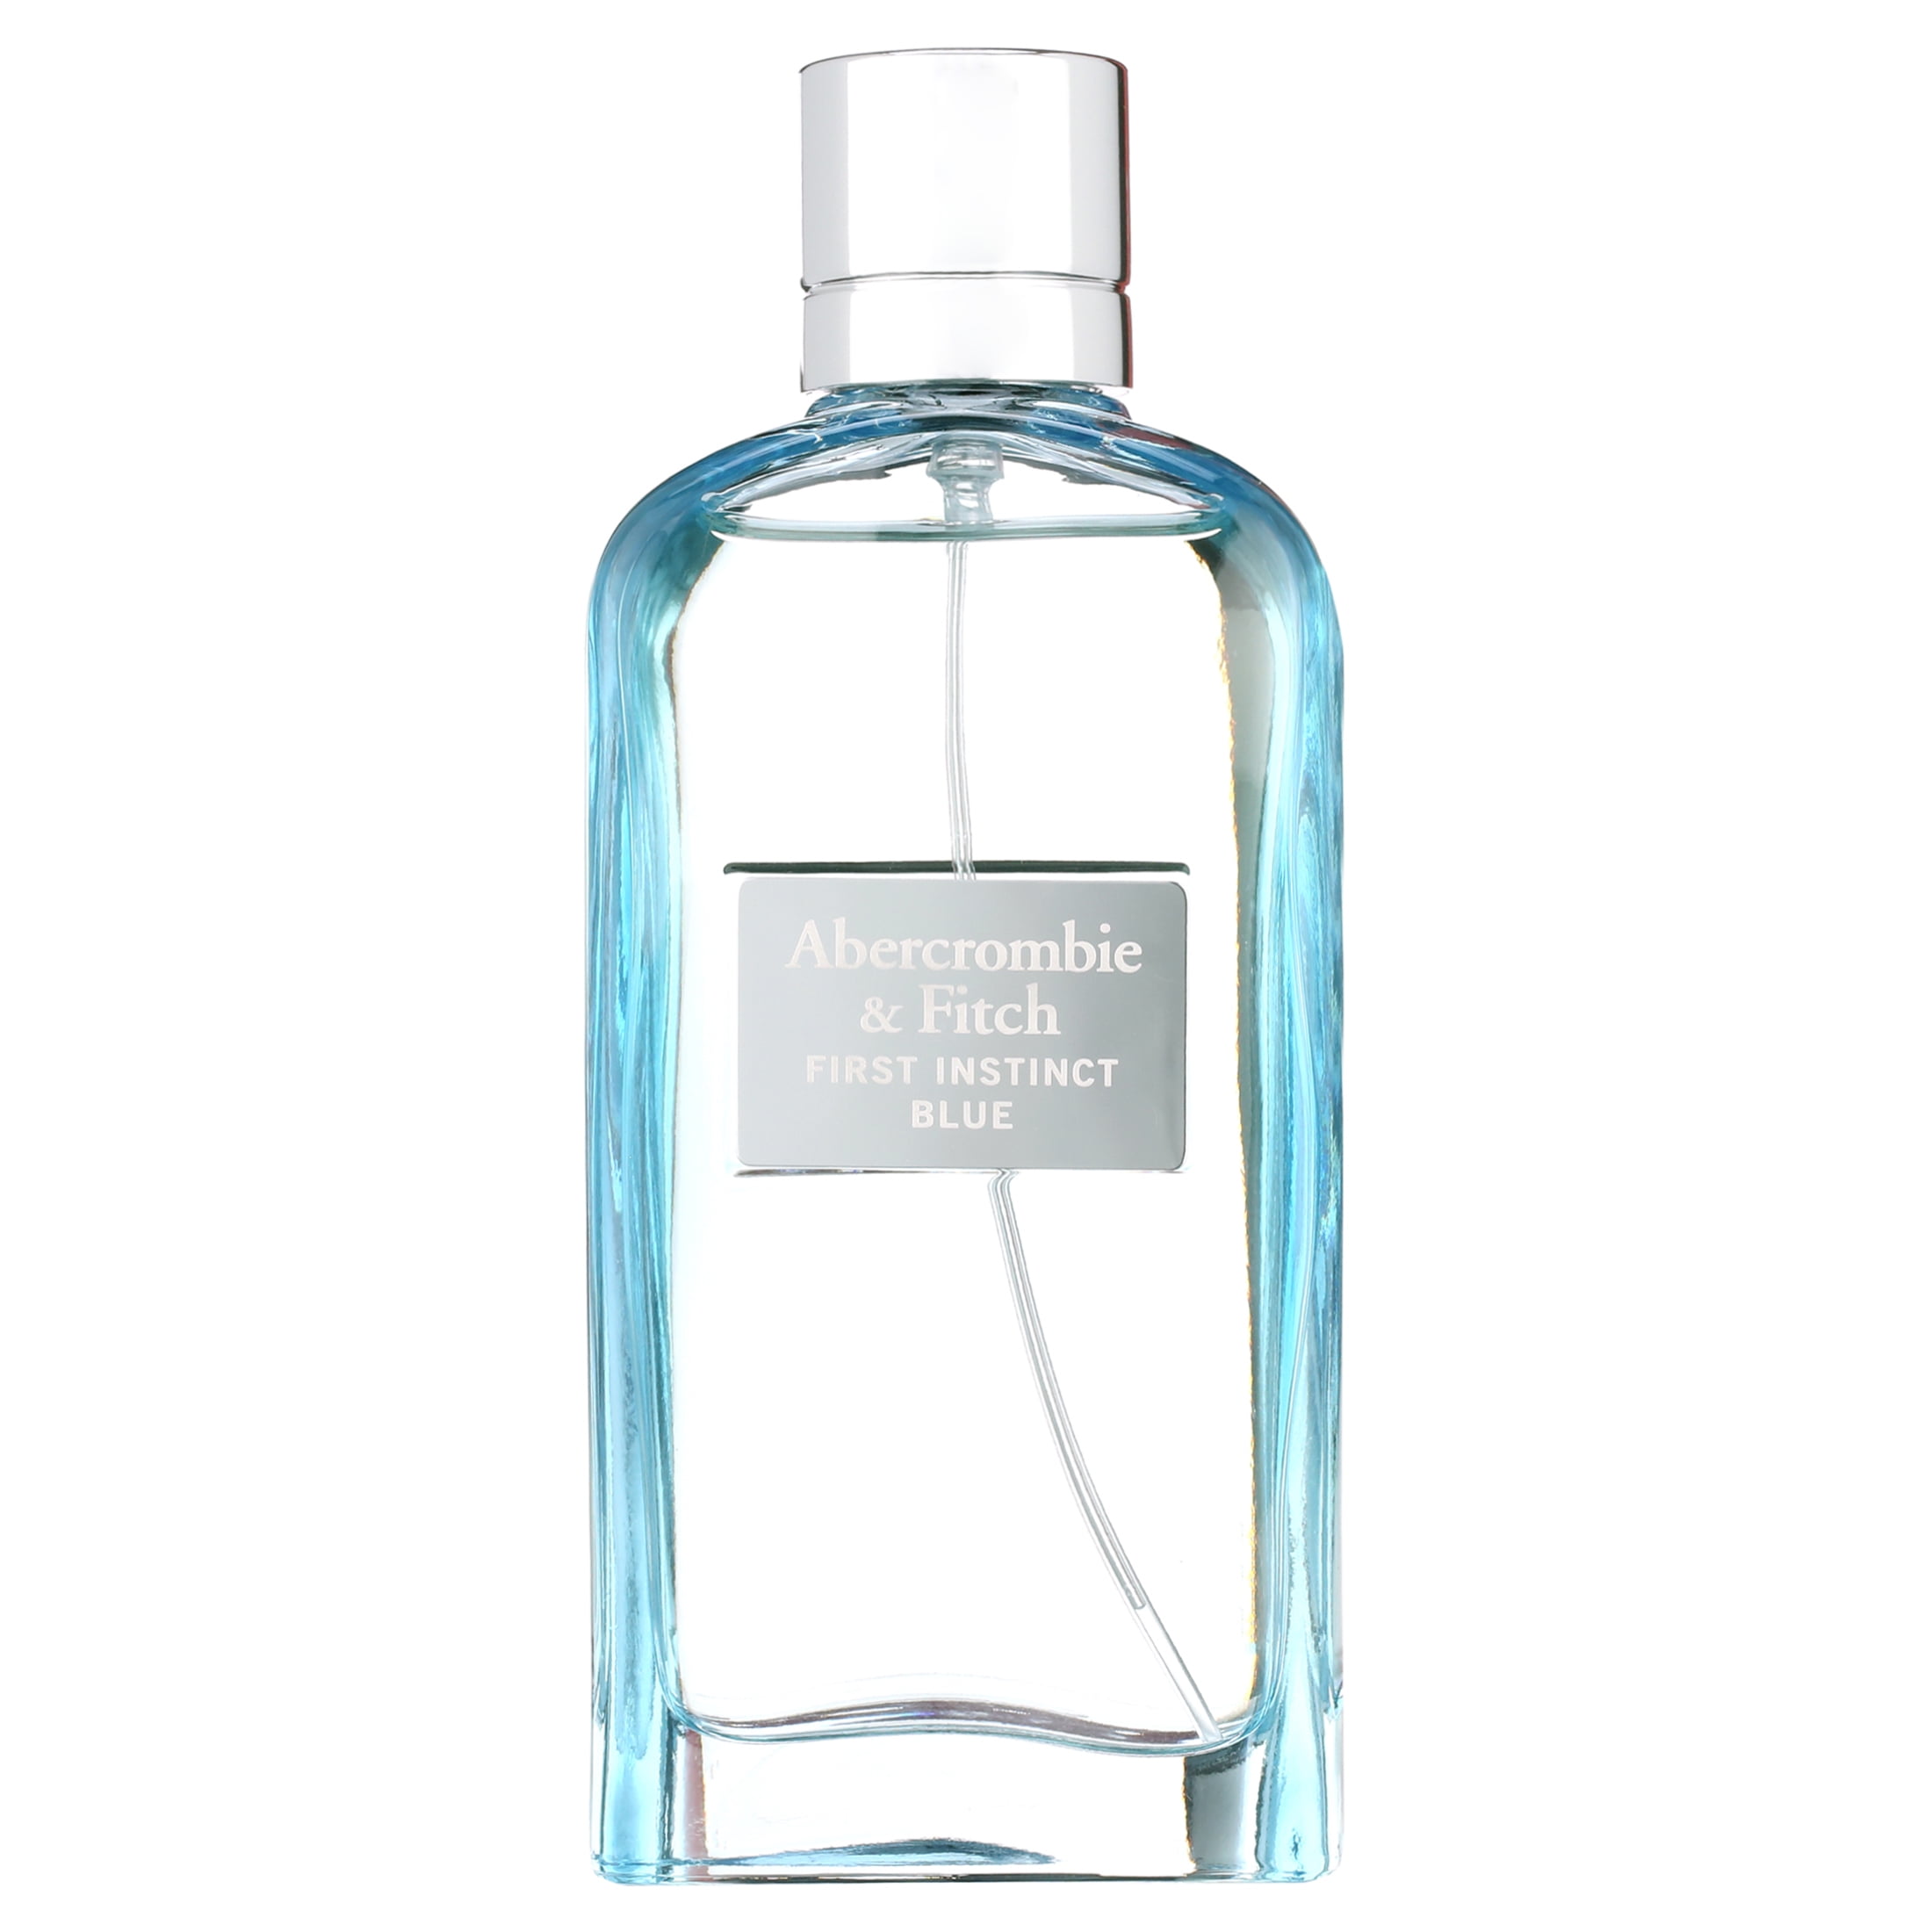 First Instinct Blue by Abercrombie and Fitch for Women - 3.4 oz